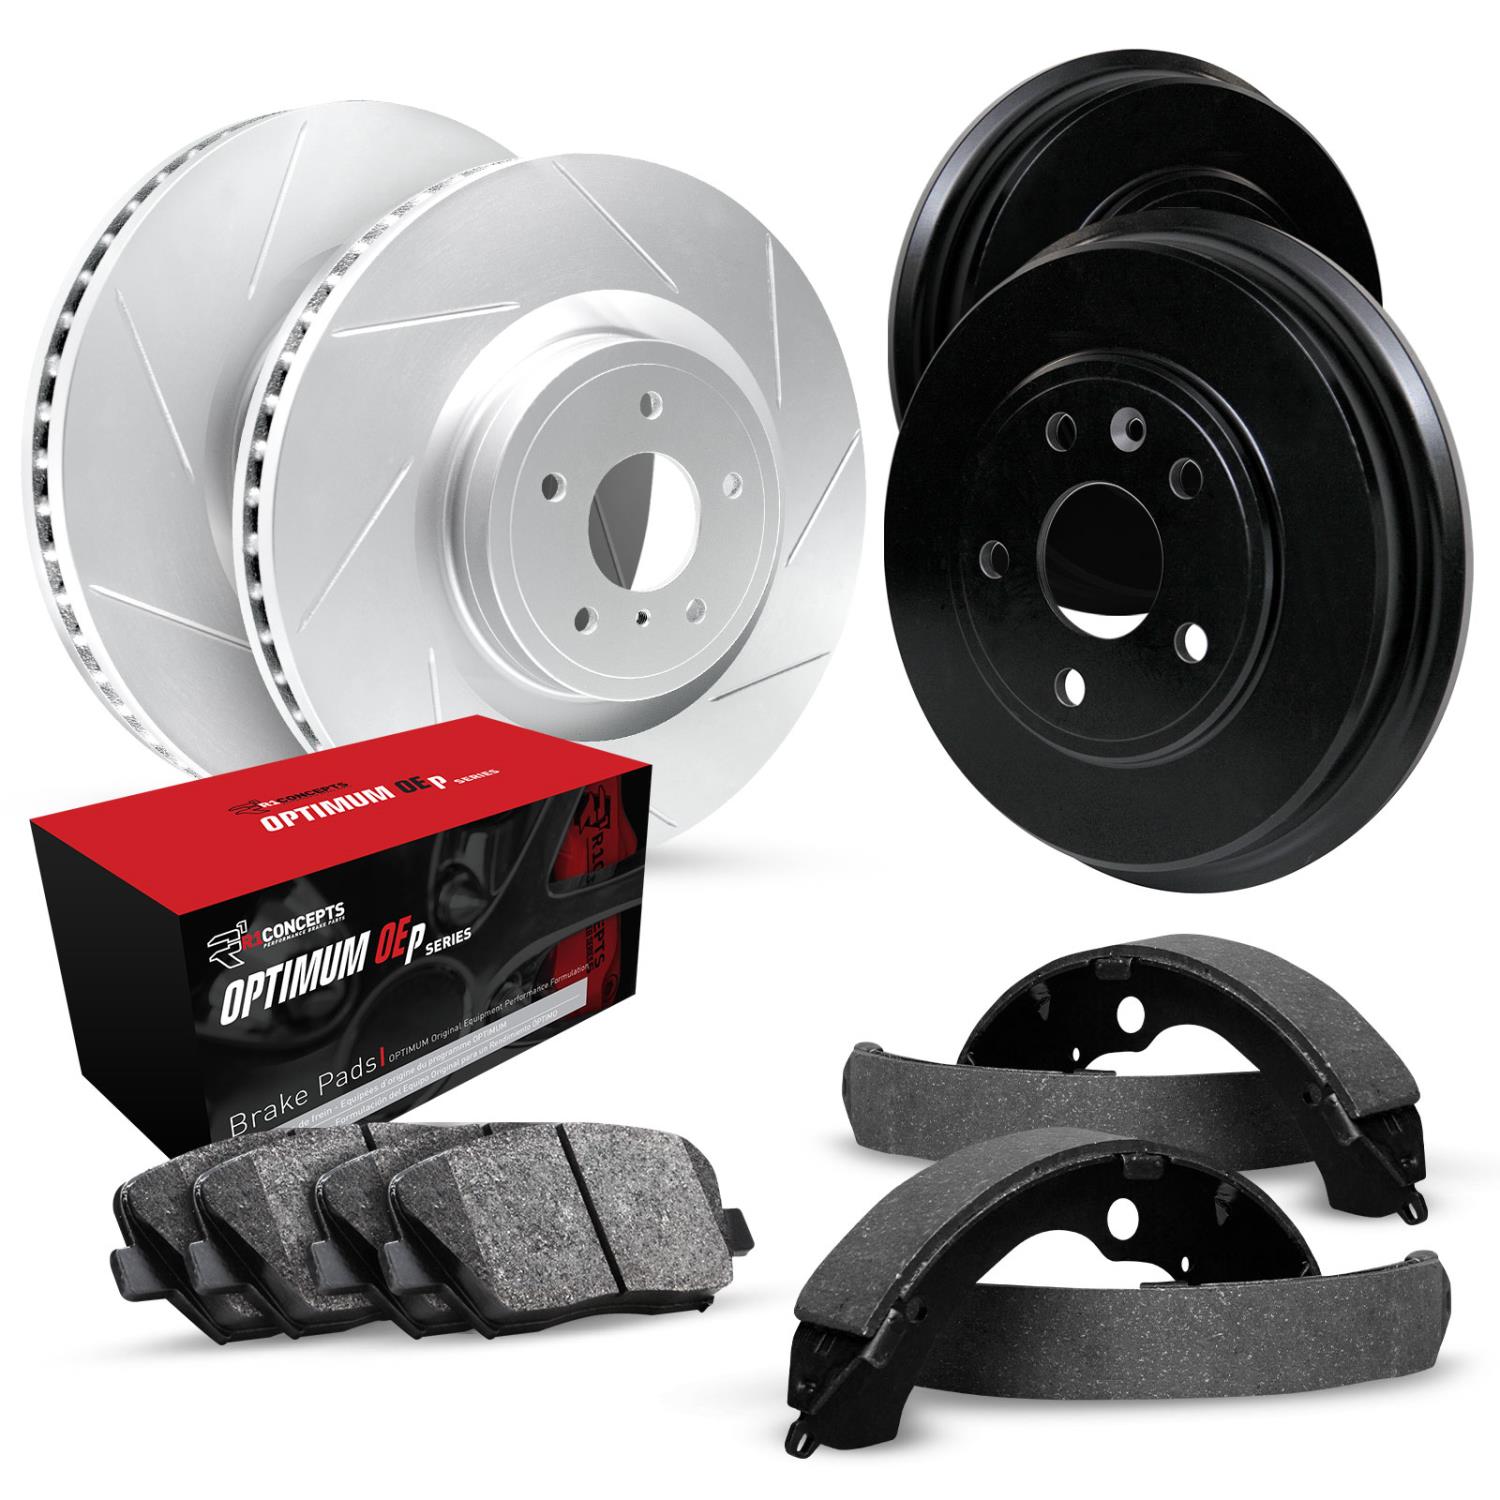 GEO-Carbon Slotted Brake Rotor & Drum Set w/Optimum OE Pads & Shoes, 1976-1985 Ford/Lincoln/Mercury/Mazda